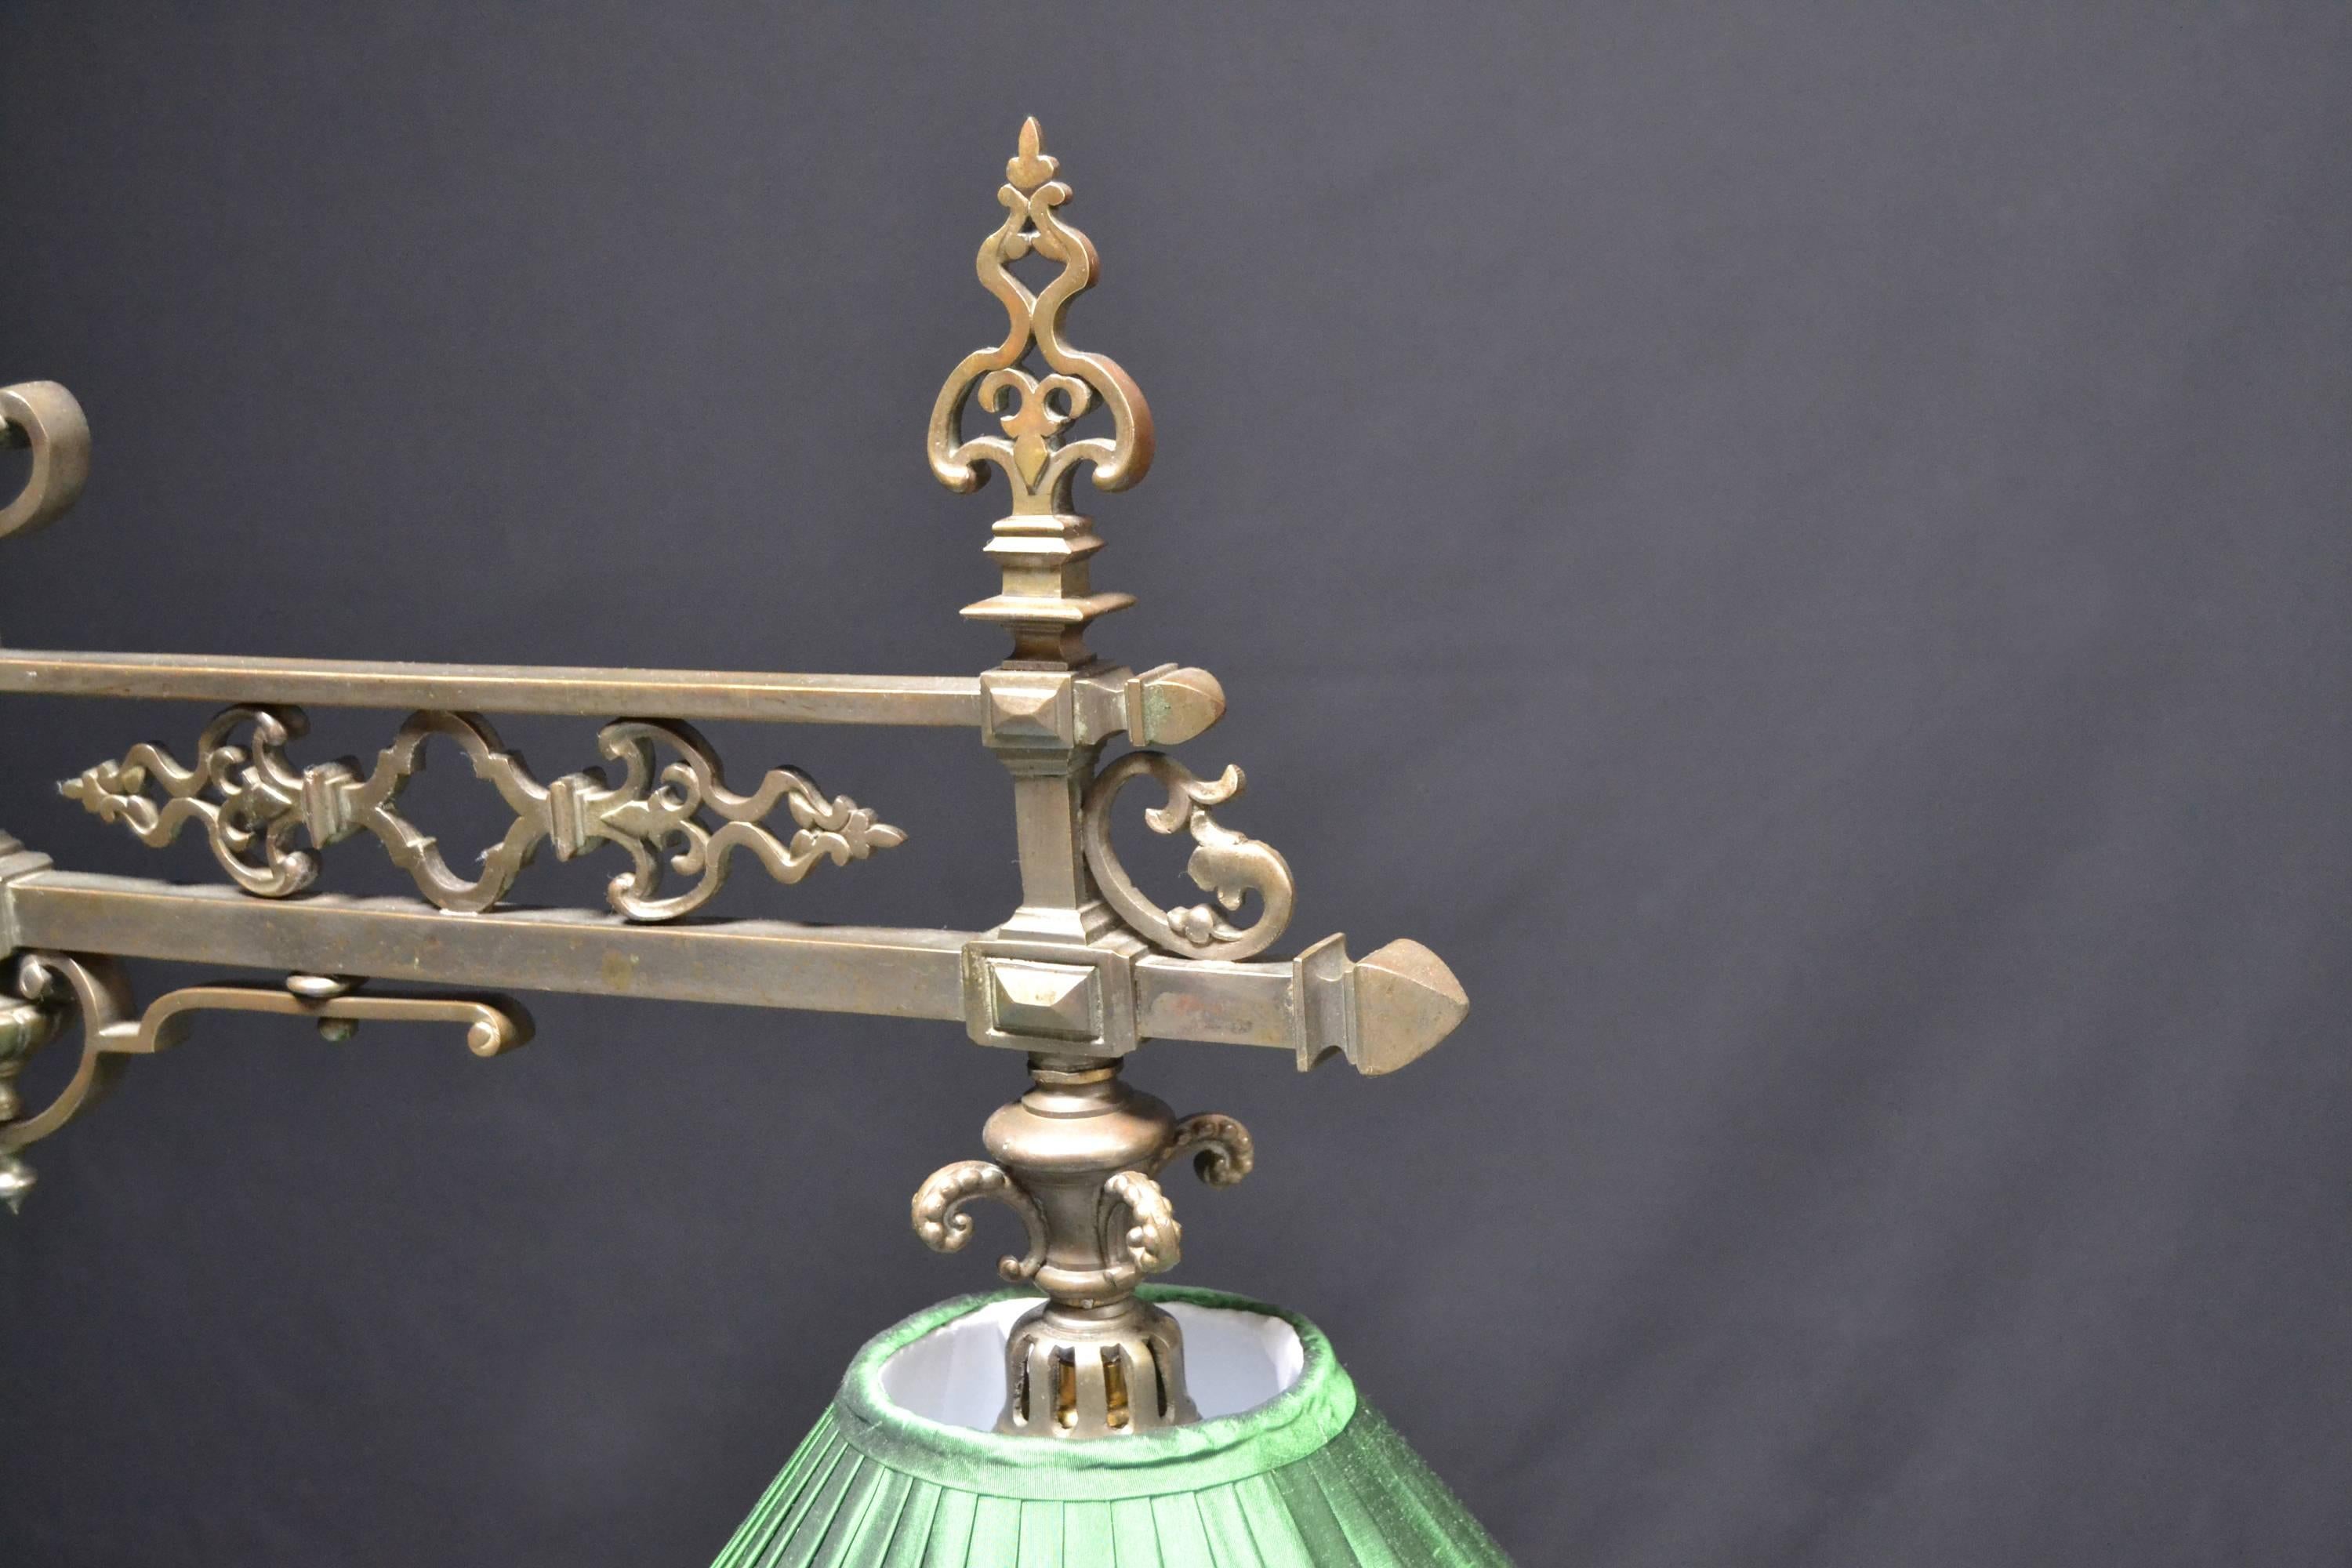 A superb decorative cast brass framed Billiard , snooker or pool table lamp featuring a central horizontal framed frieze with ornamental castings , joined to a central upright via embellished cast braces, adorned with a cast symbol of 